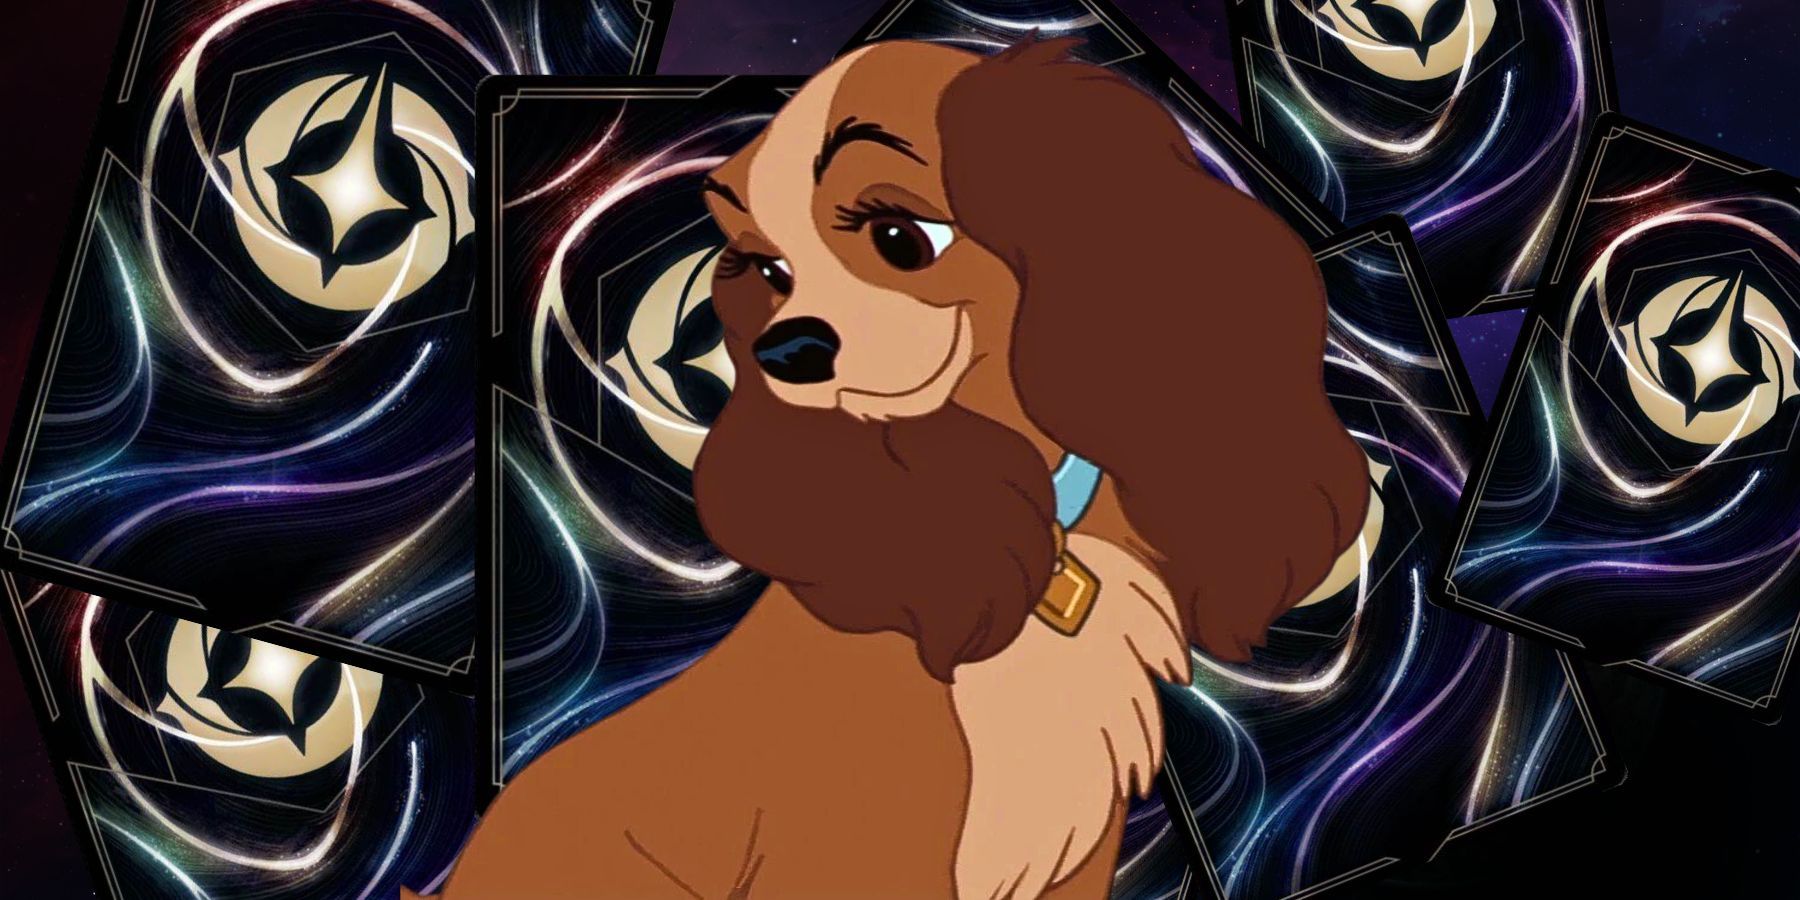 Lady from Lady and the Tramp in front of some Lorcana card backs